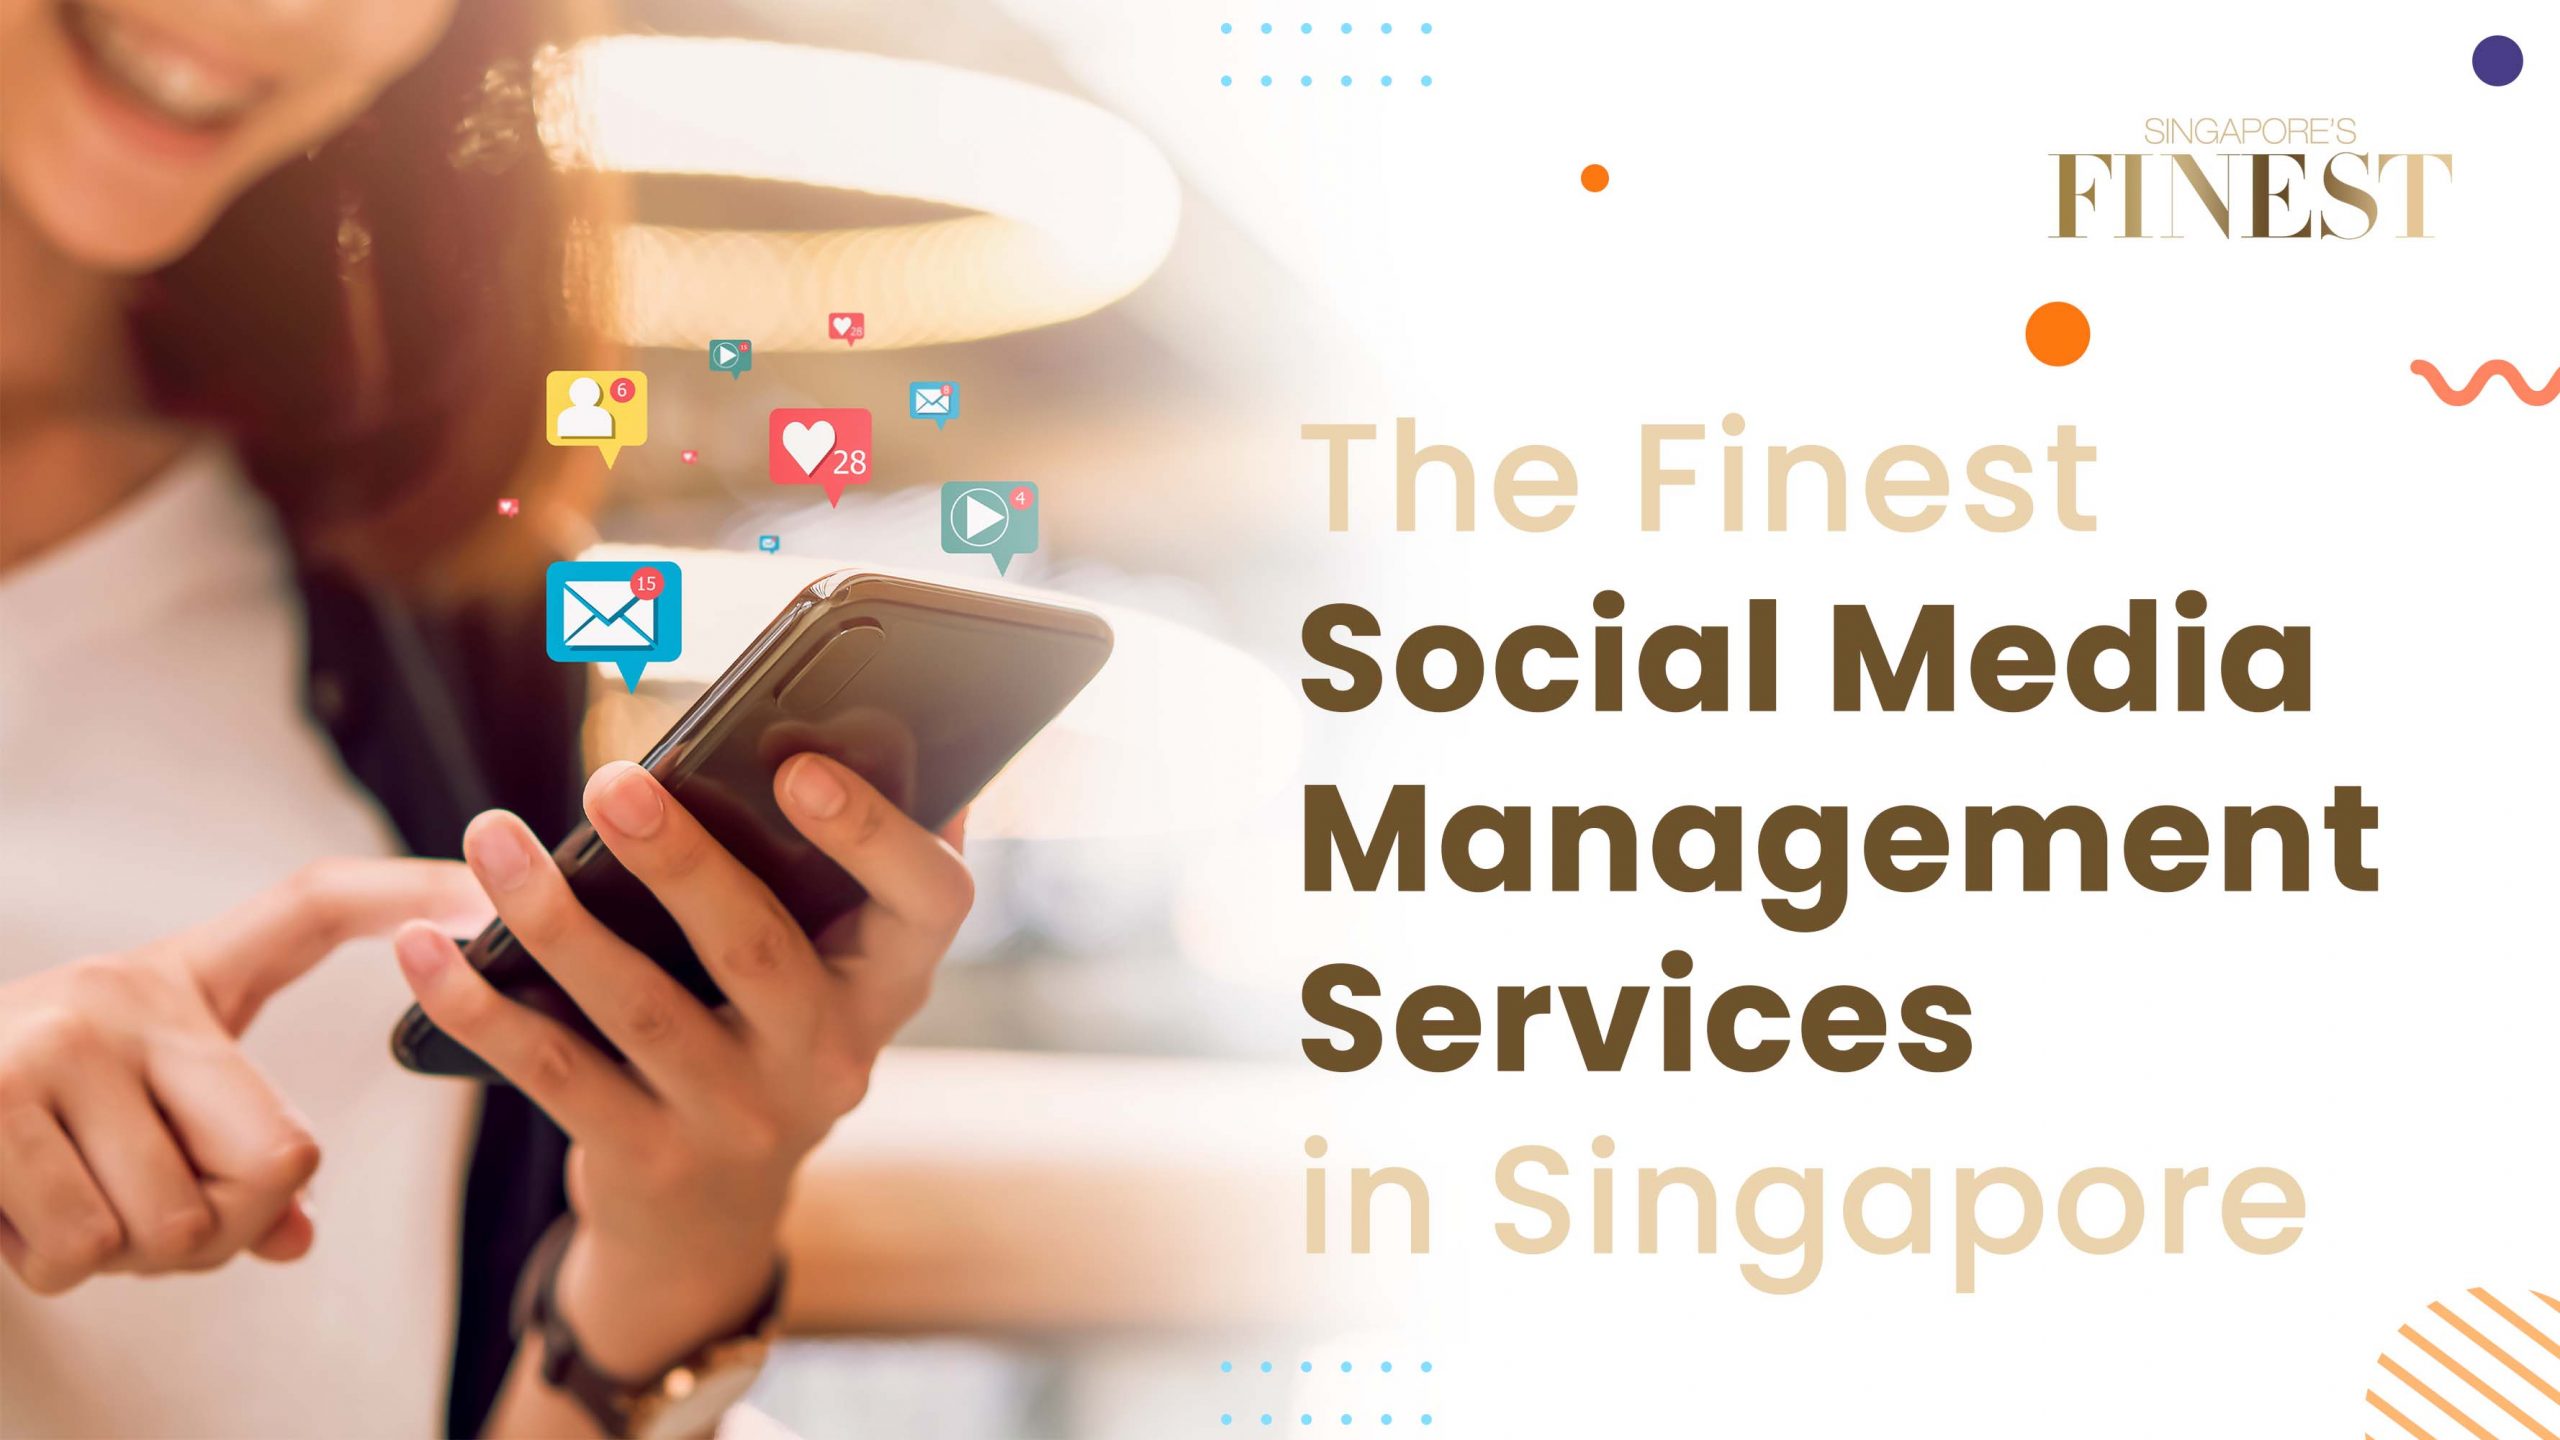 The Finest Social Media Management Services in Singapore